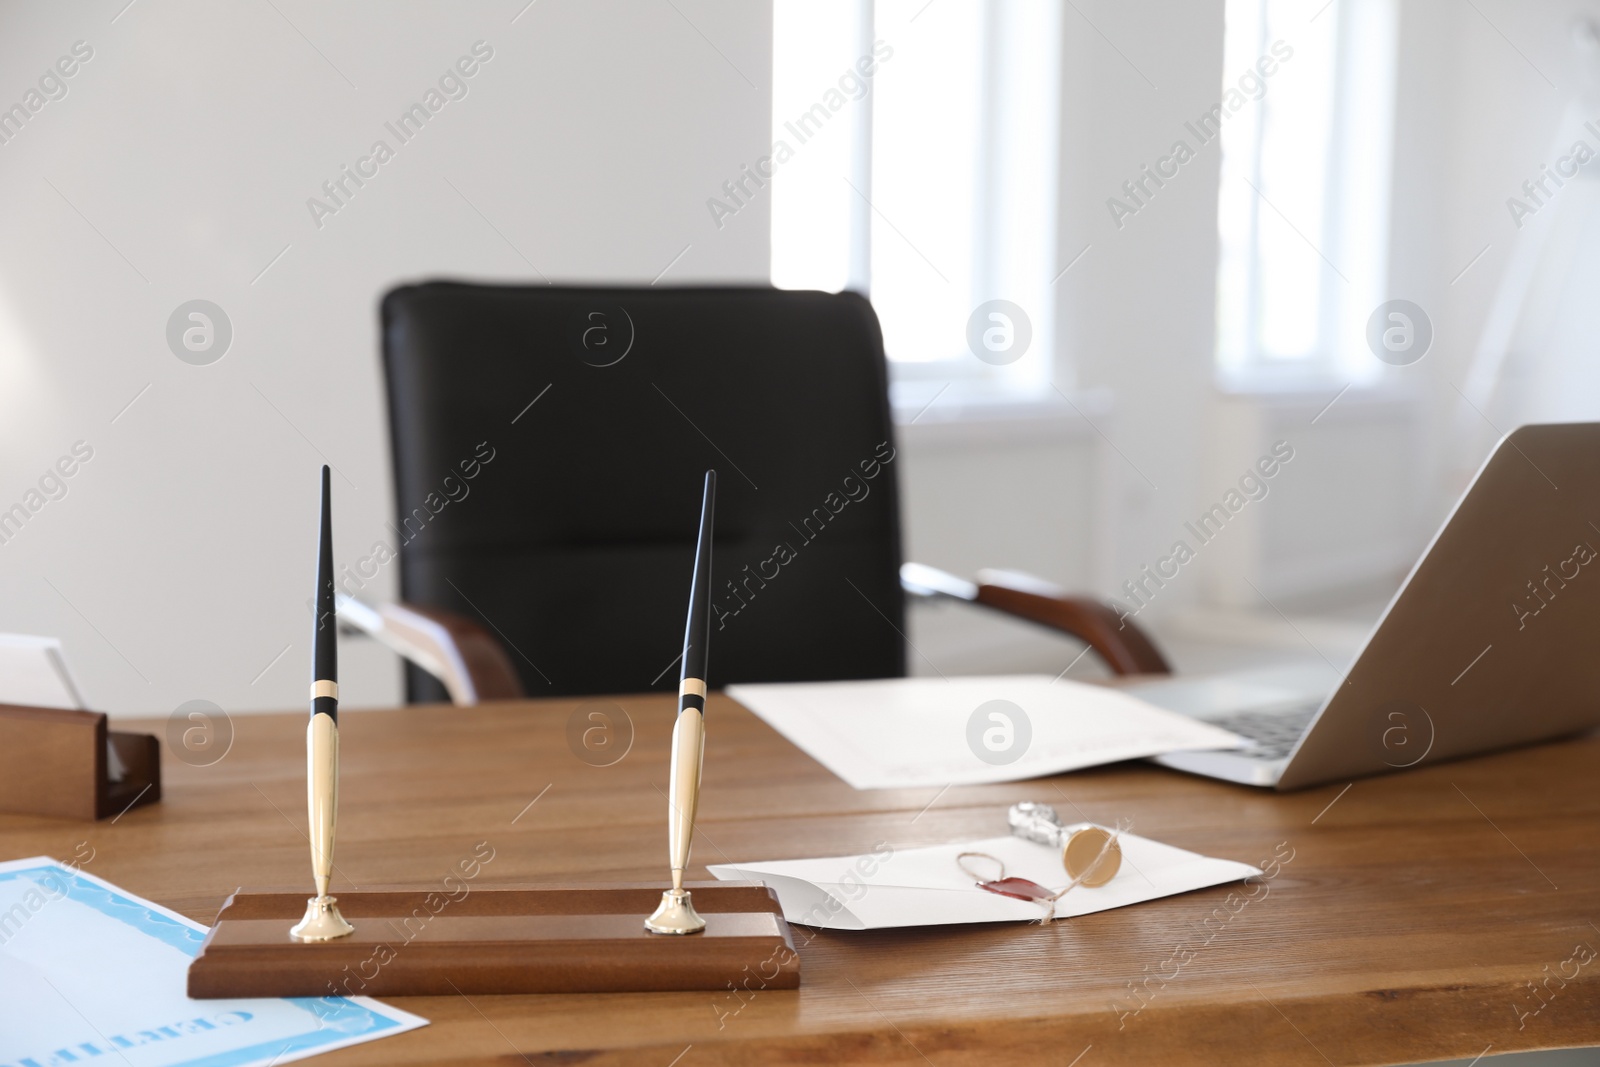 Photo of Wax stamp, documents and laptop on desk in notary's office